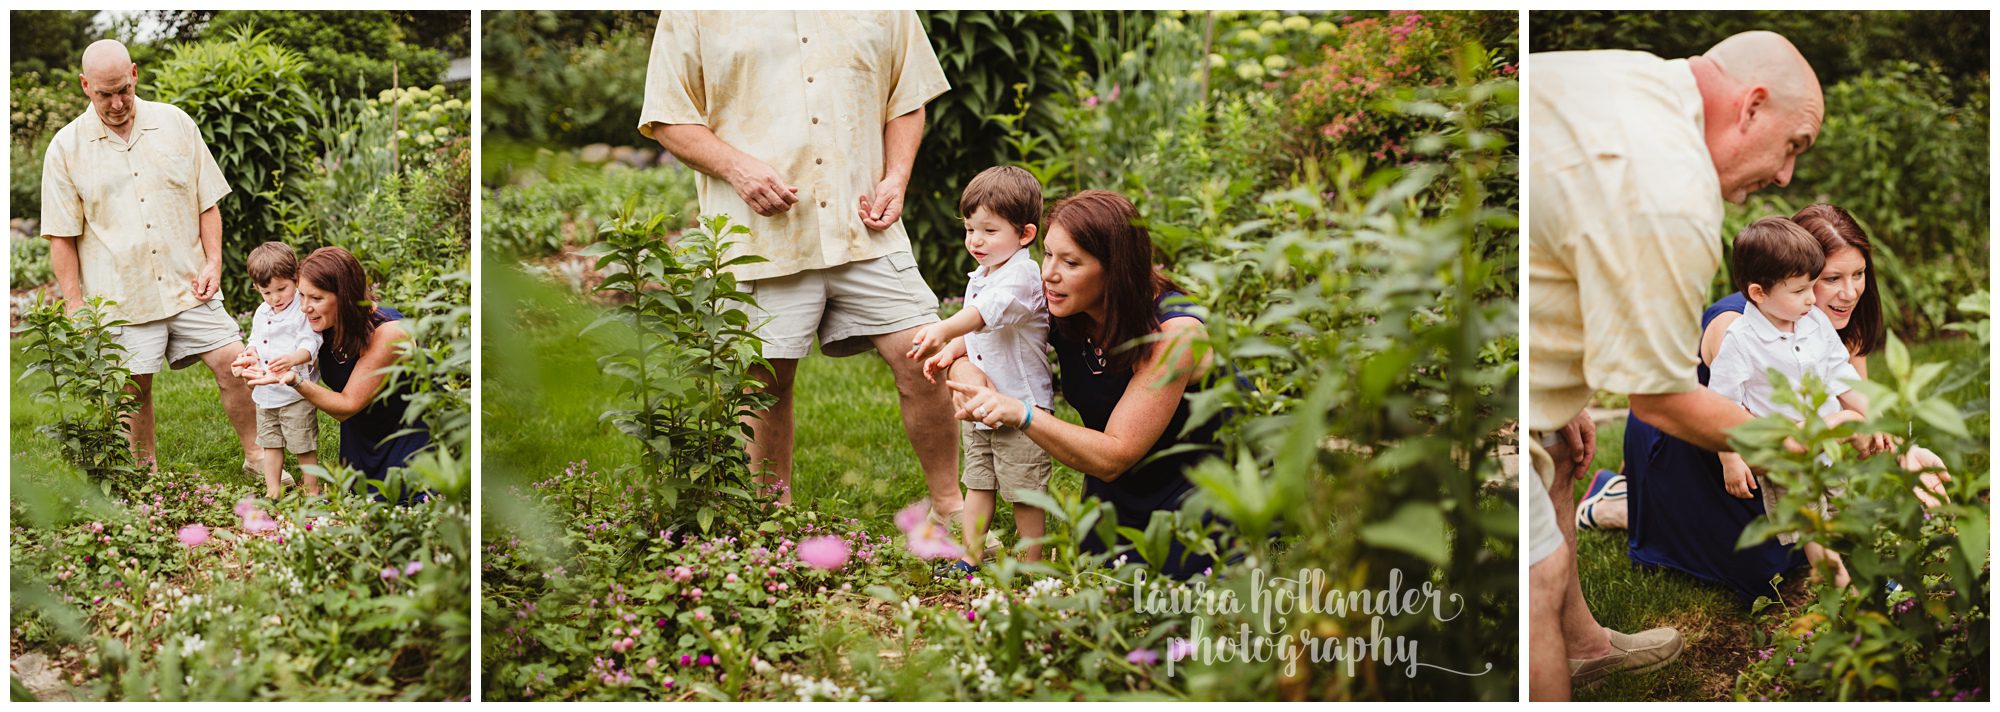 lifestyle family session at Southern Exposure in Battle Creek, MI